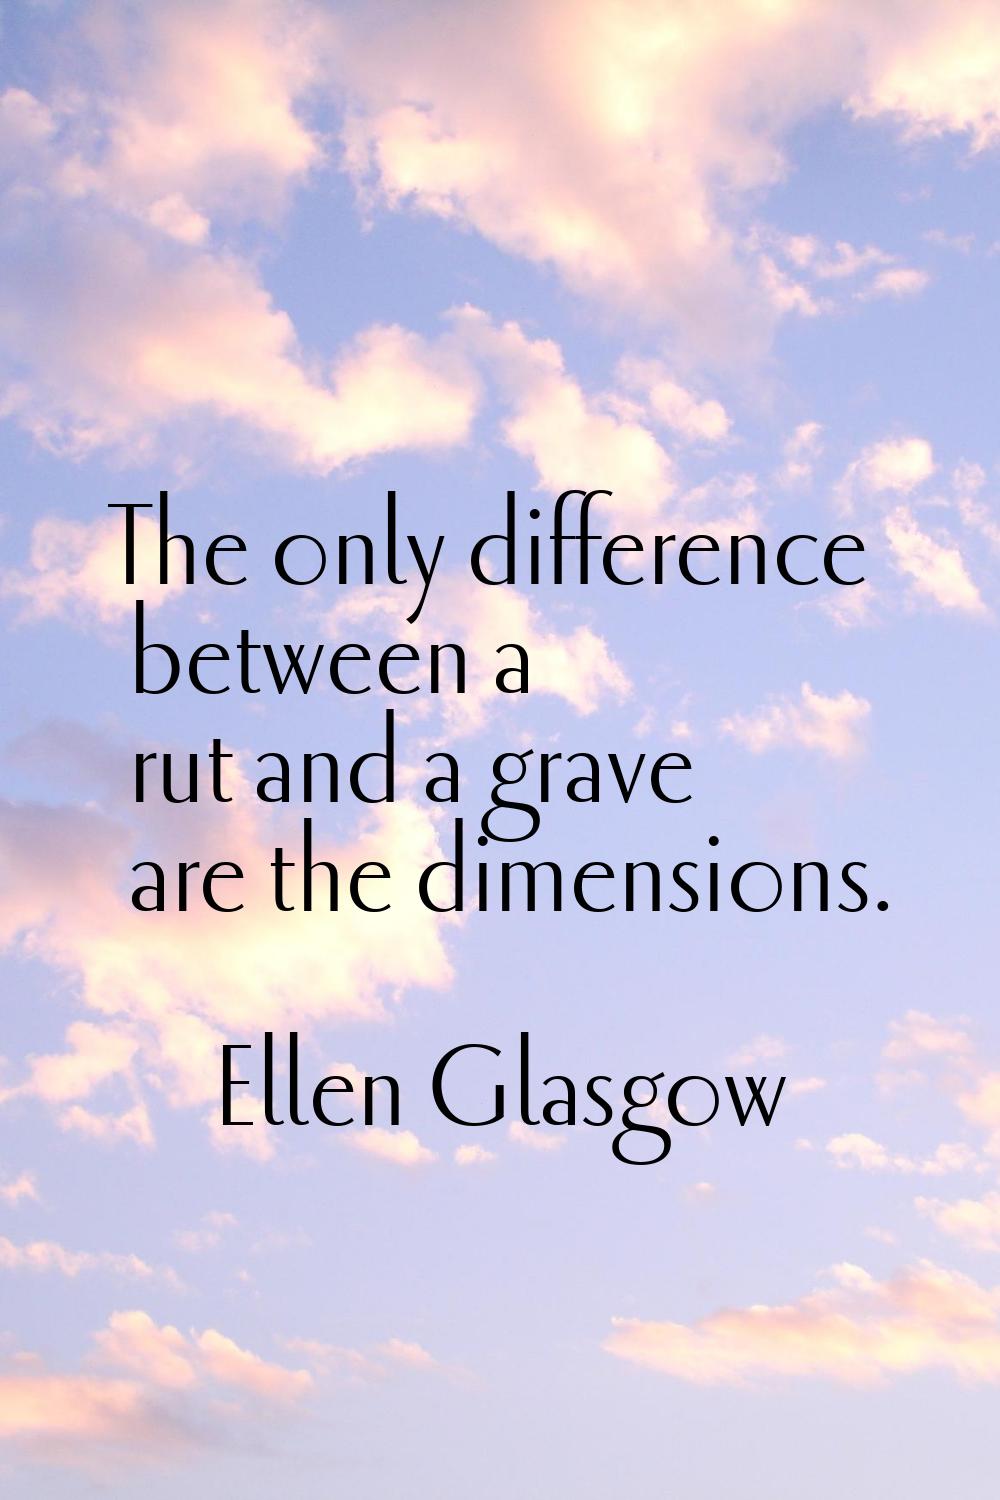 The only difference between a rut and a grave are the dimensions.